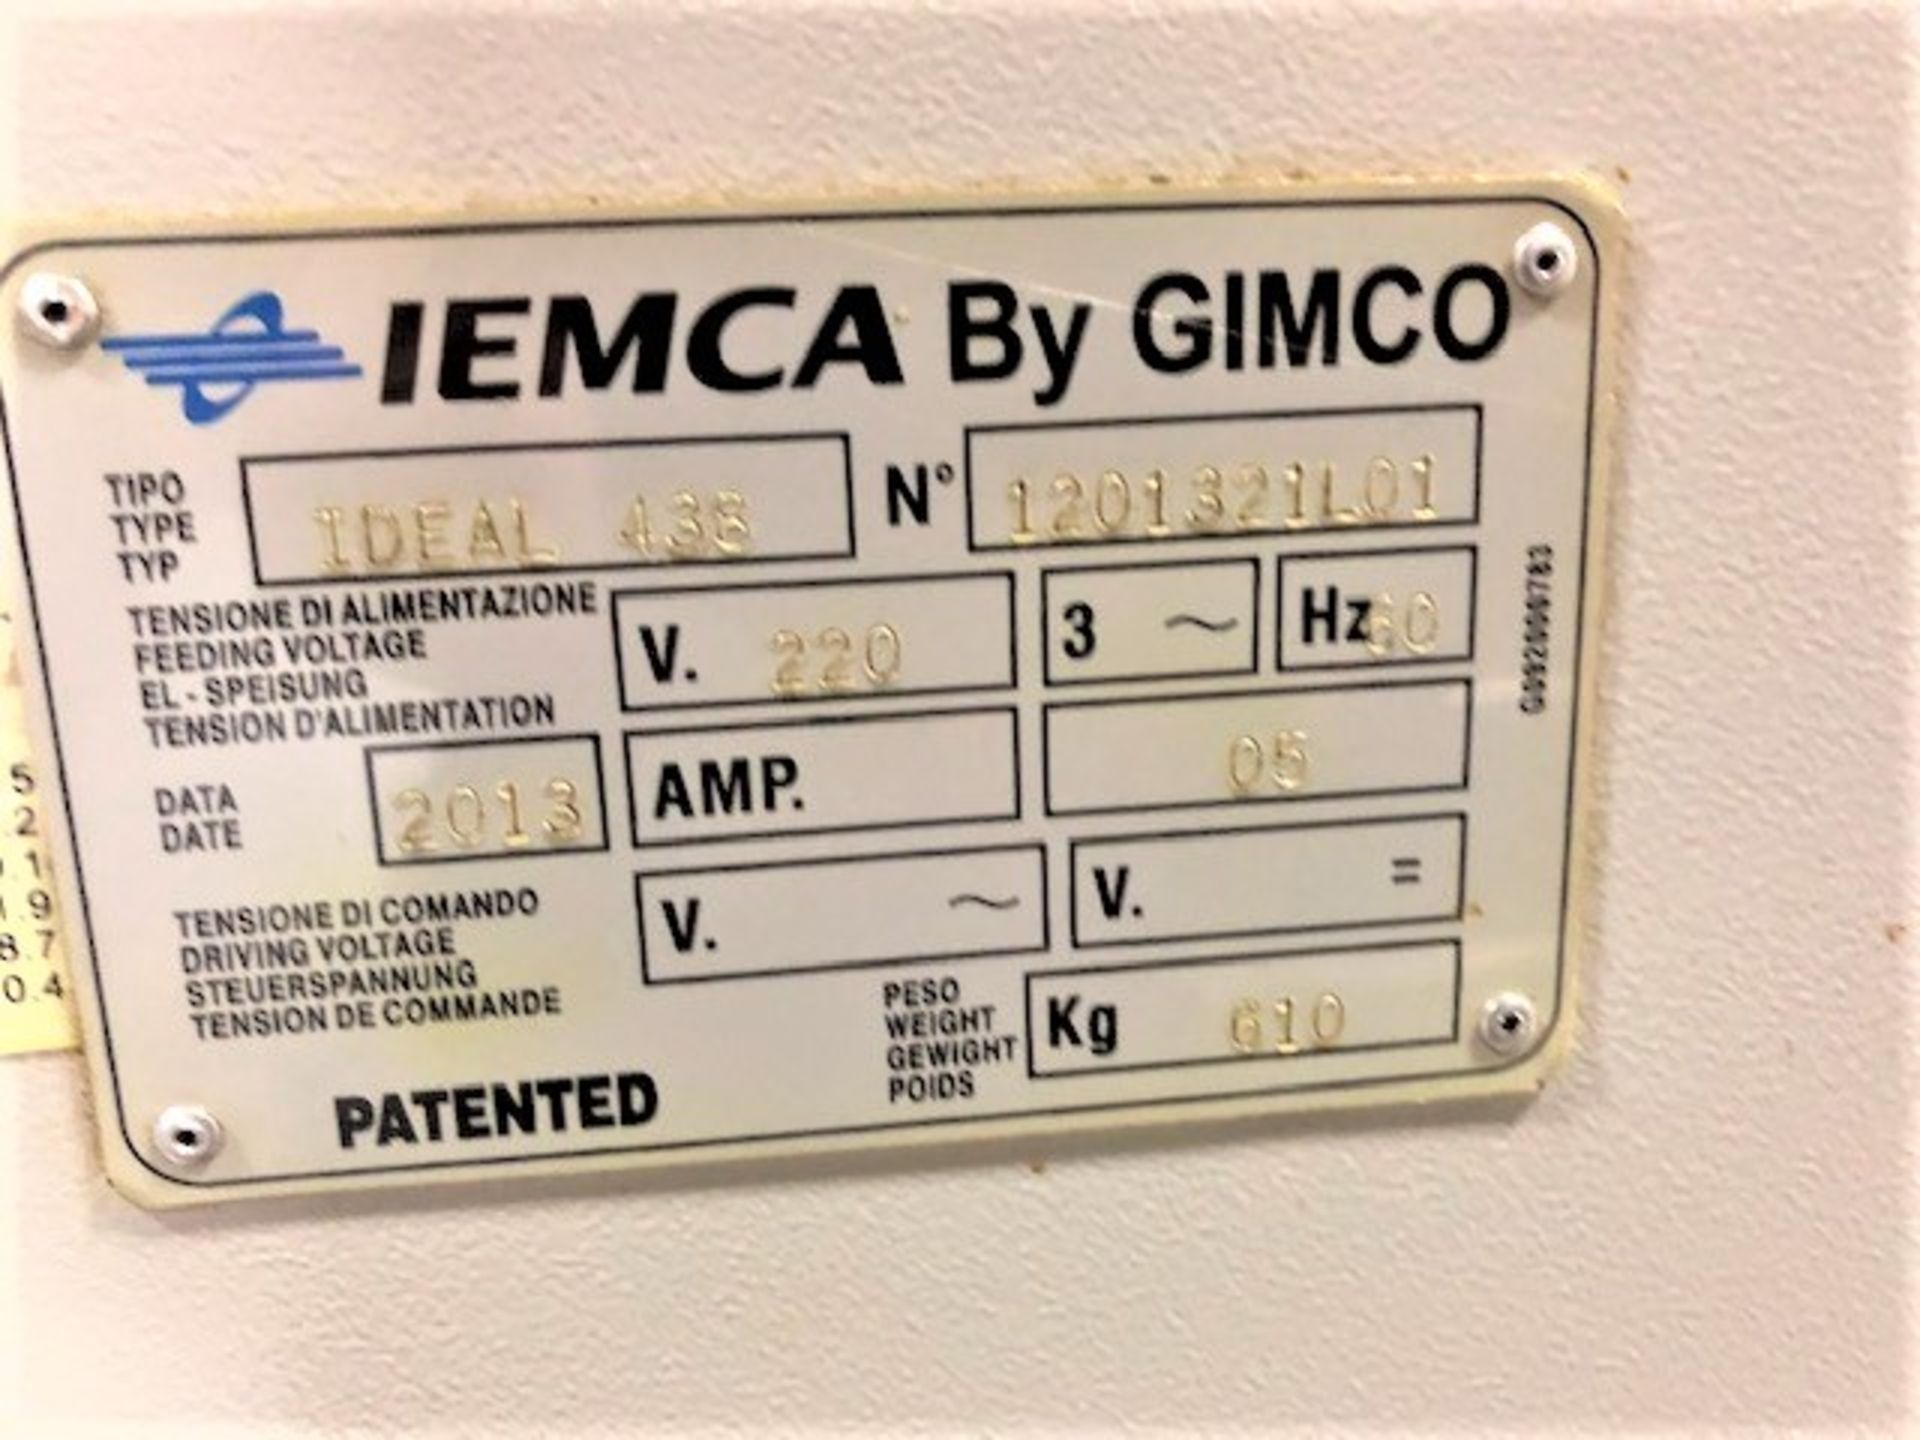 IEMCA IDEAL 438 MAGAZINE TYPE AUTOMATIC BAR FEED, S/N 1201321L01, NEW 2013 - Image 5 of 5